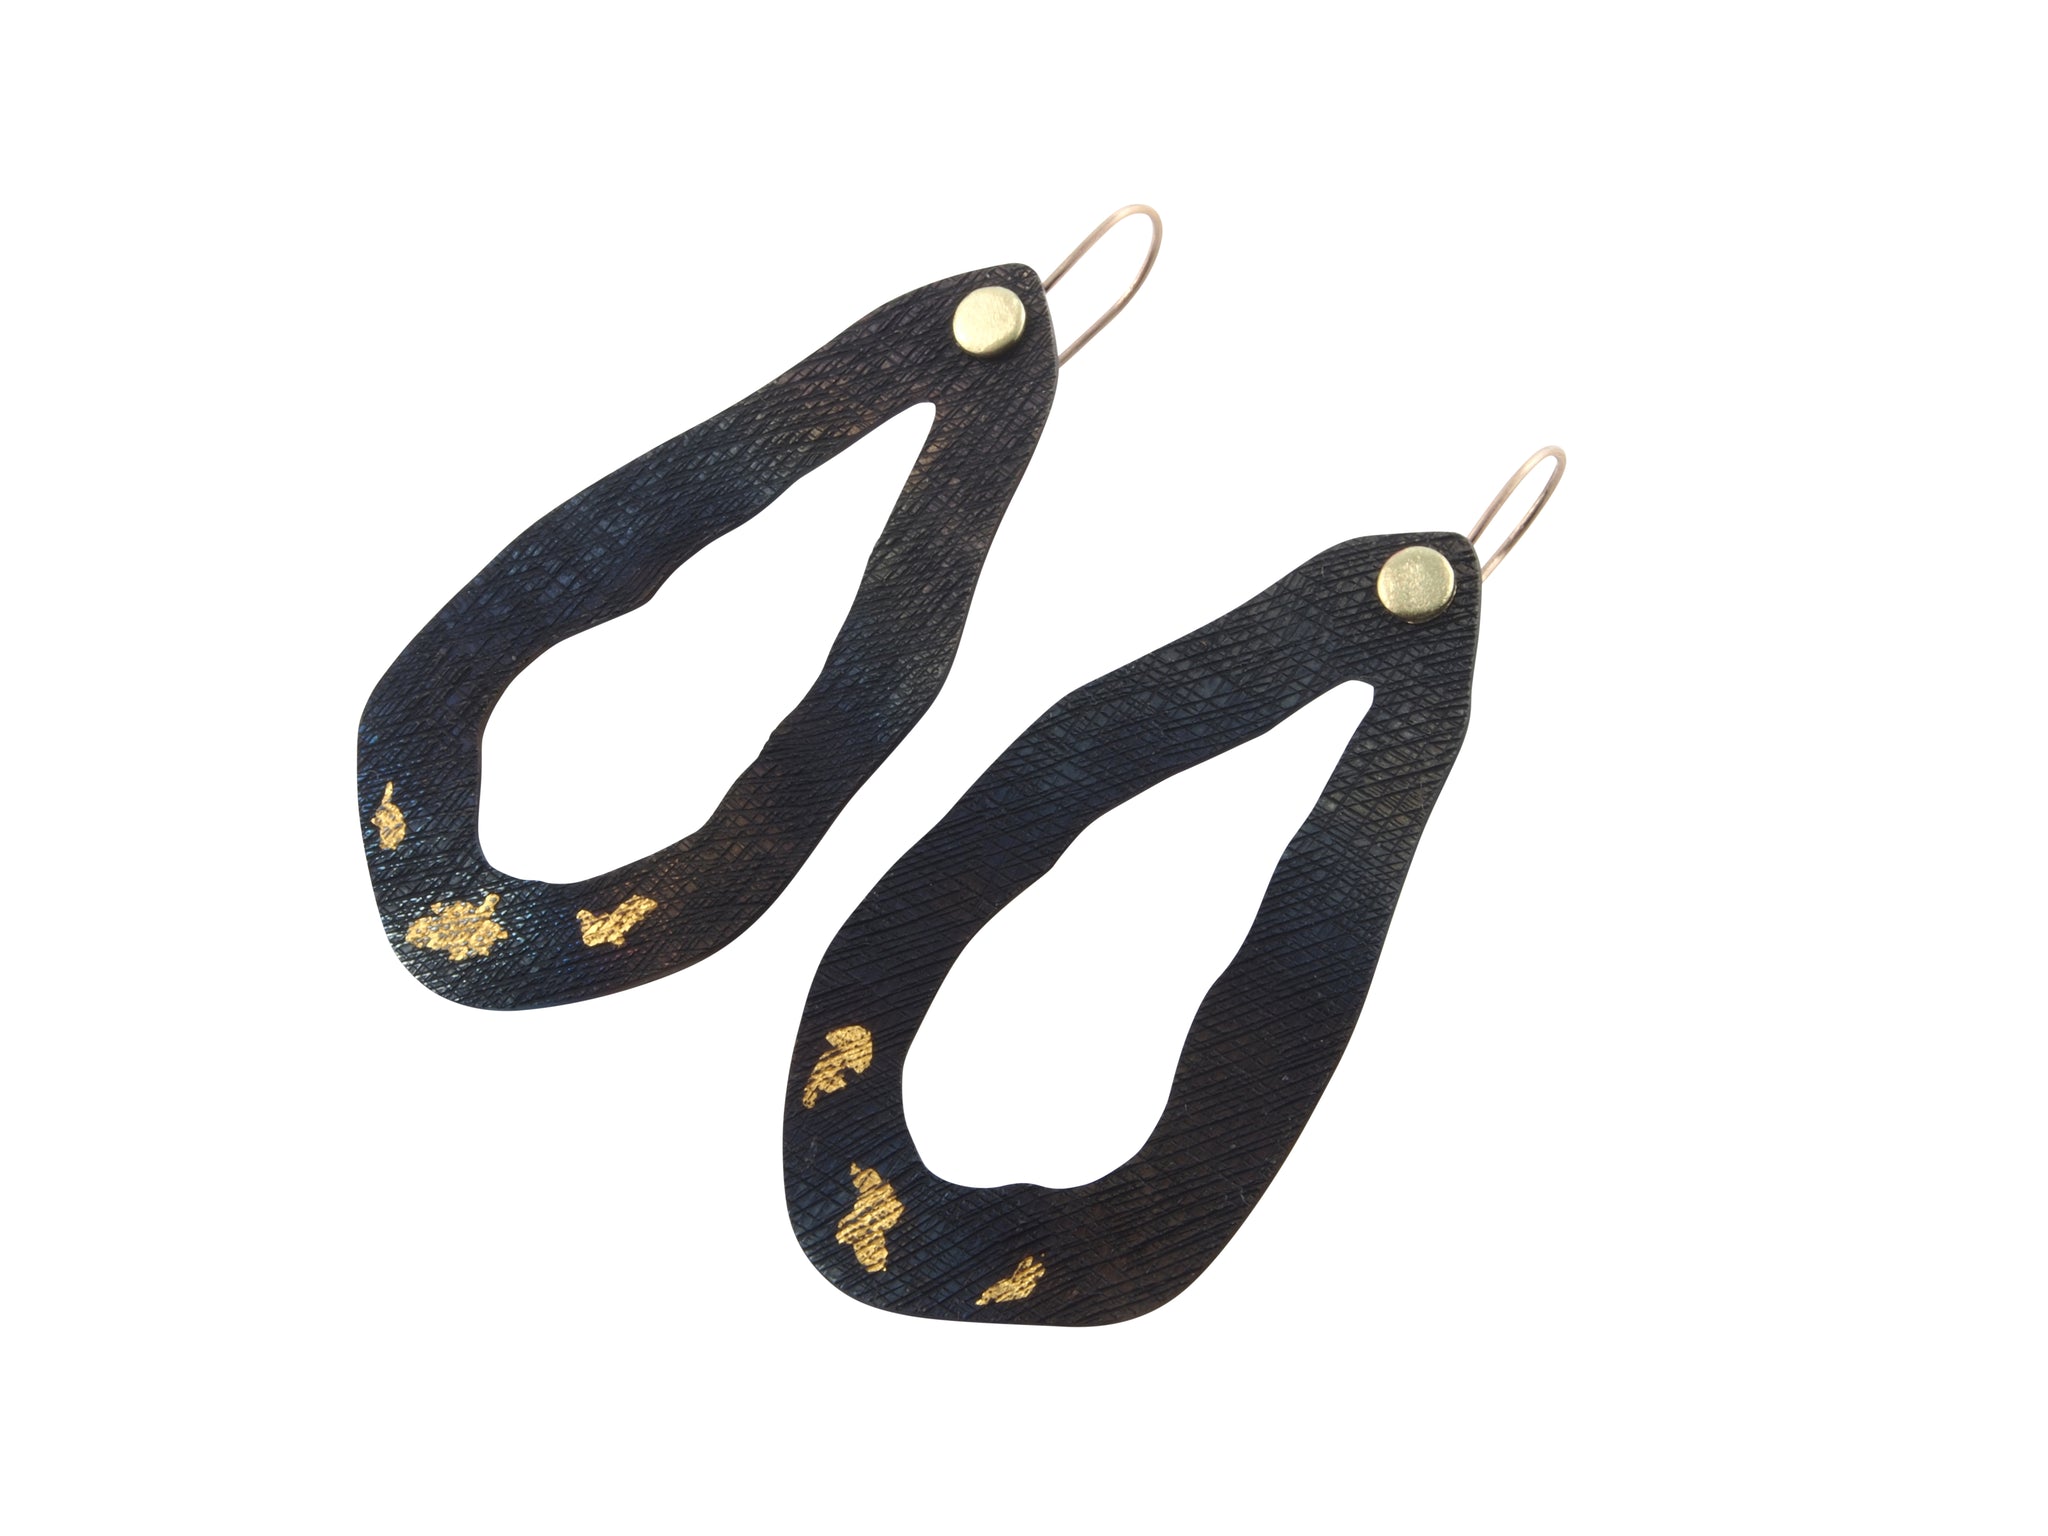 These earrings are part of a series of jewellery pieces about Tasmanian lakes. They are made from hand textured steel, inlaid gold and have 18 ct gold ear-wires.